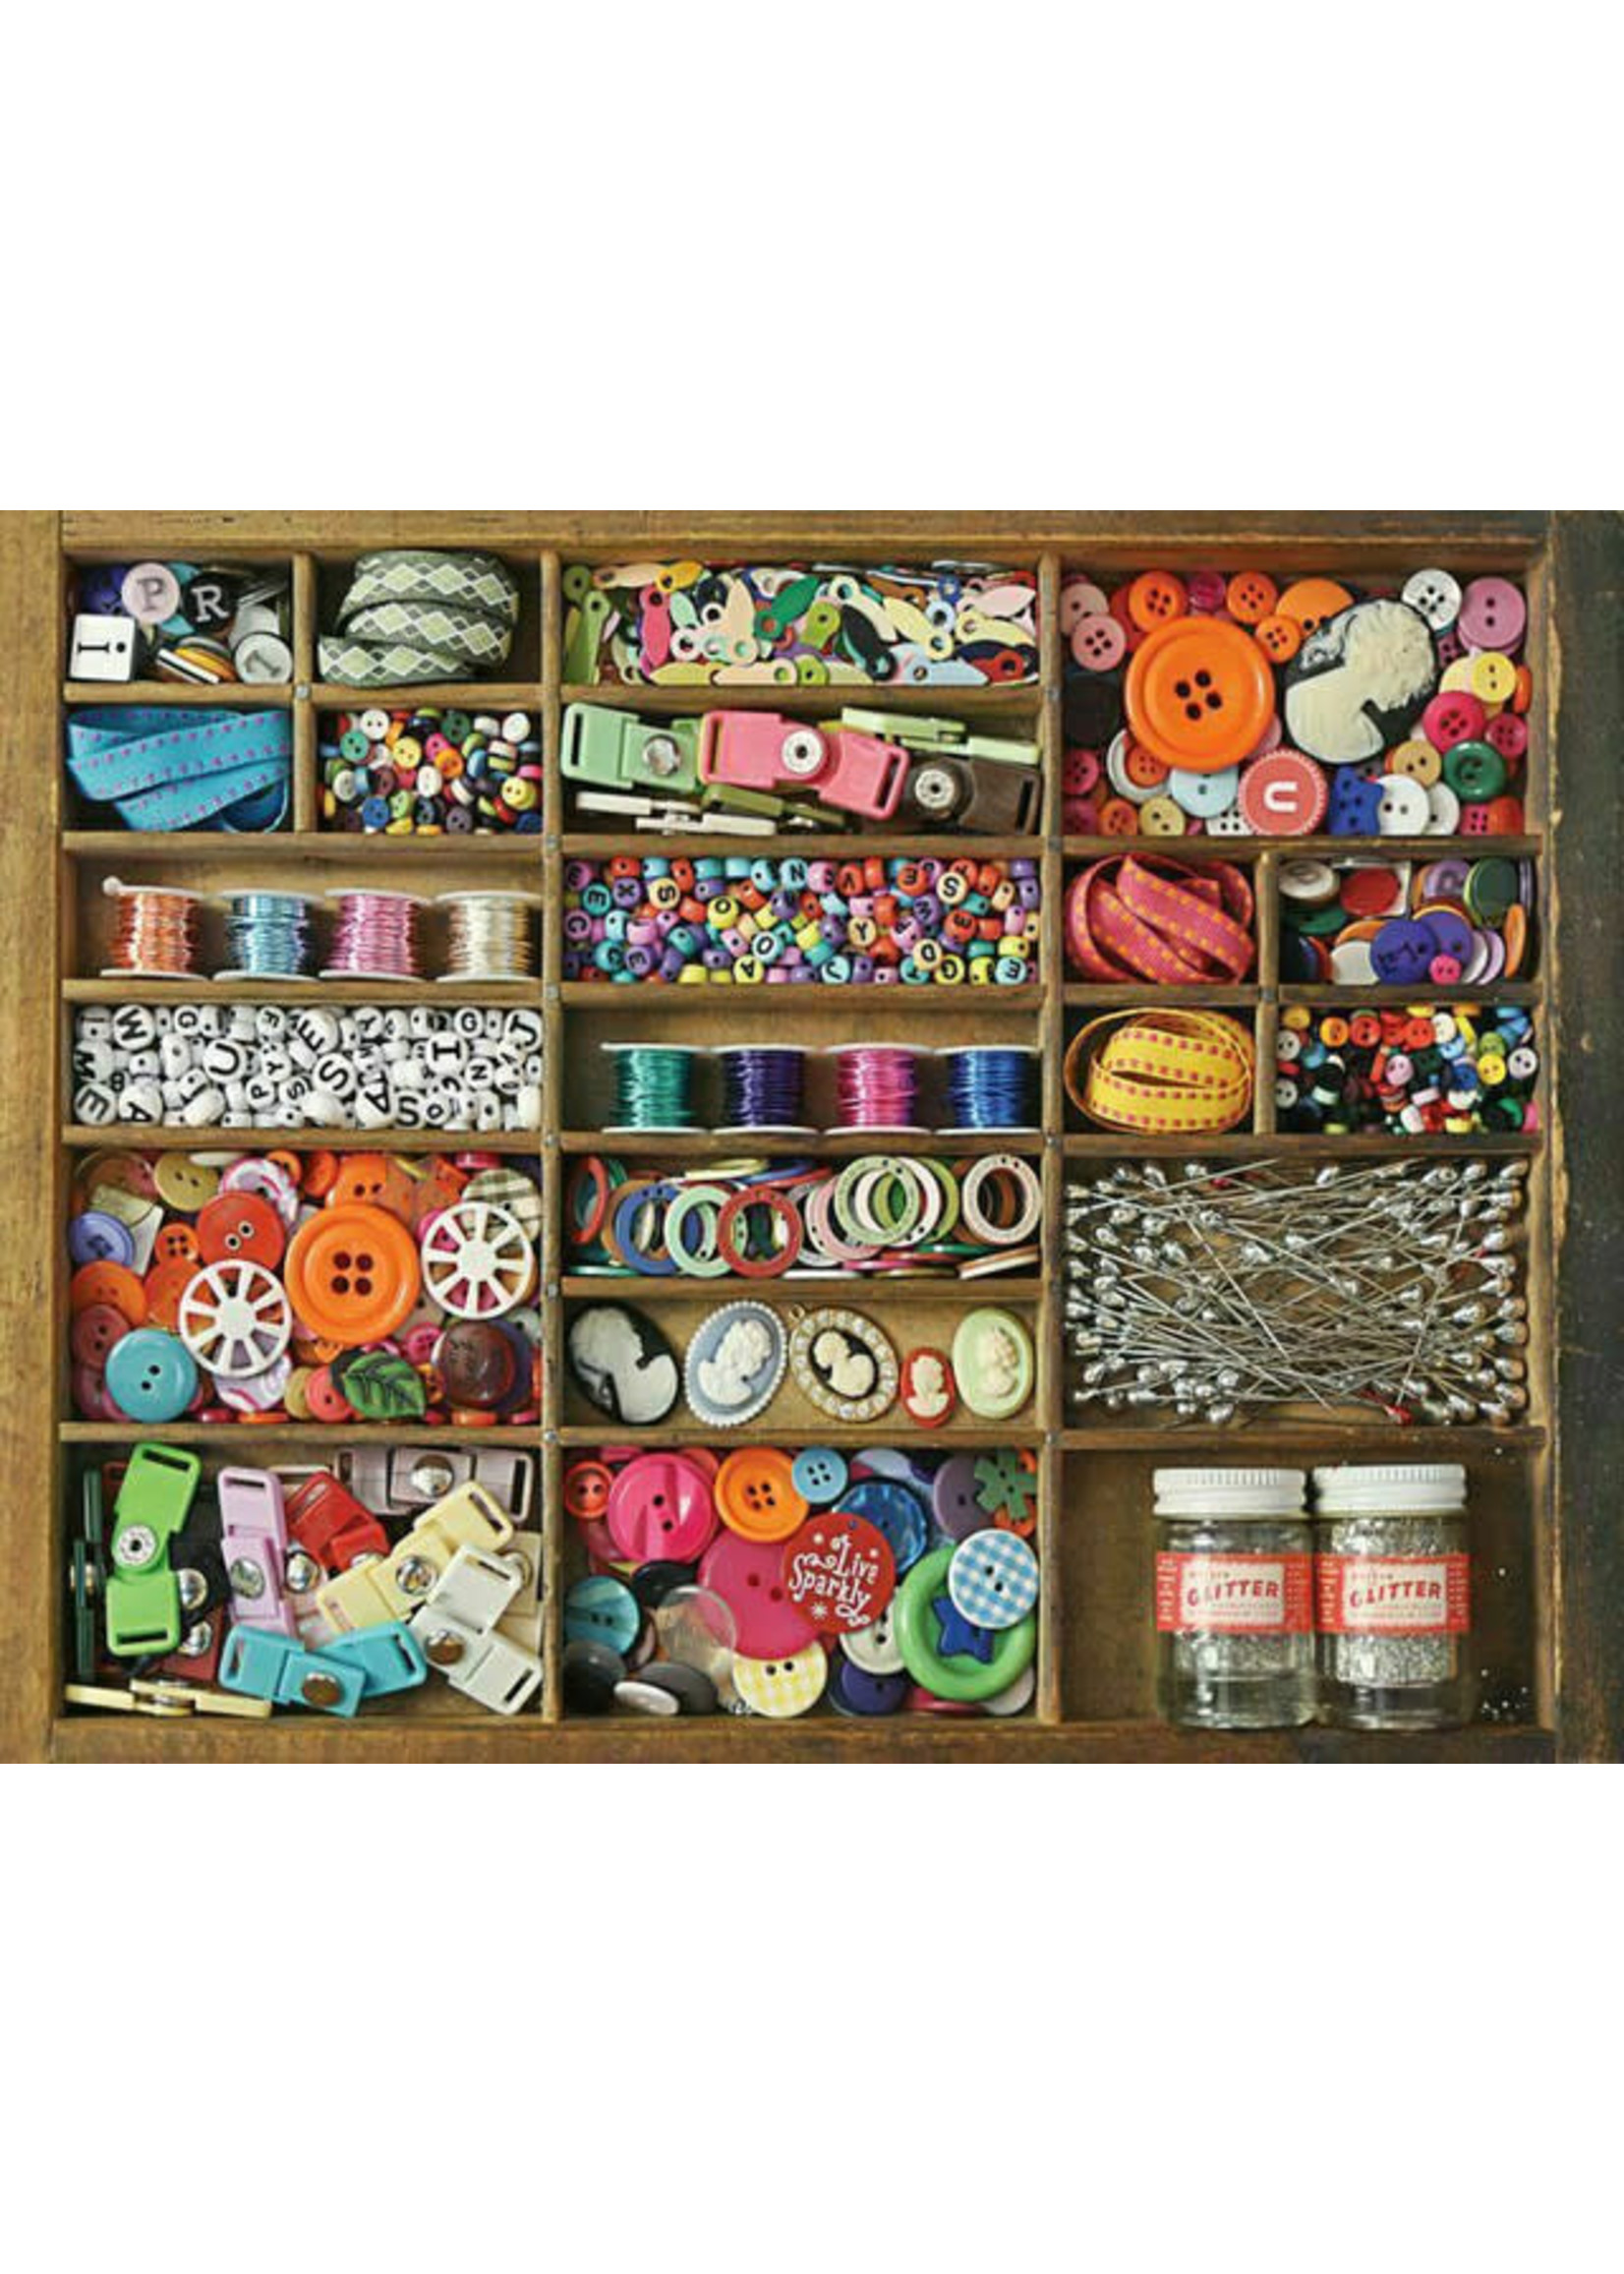 Springbok Puzzles "The Sewing Box" 500 Piece Puzzle